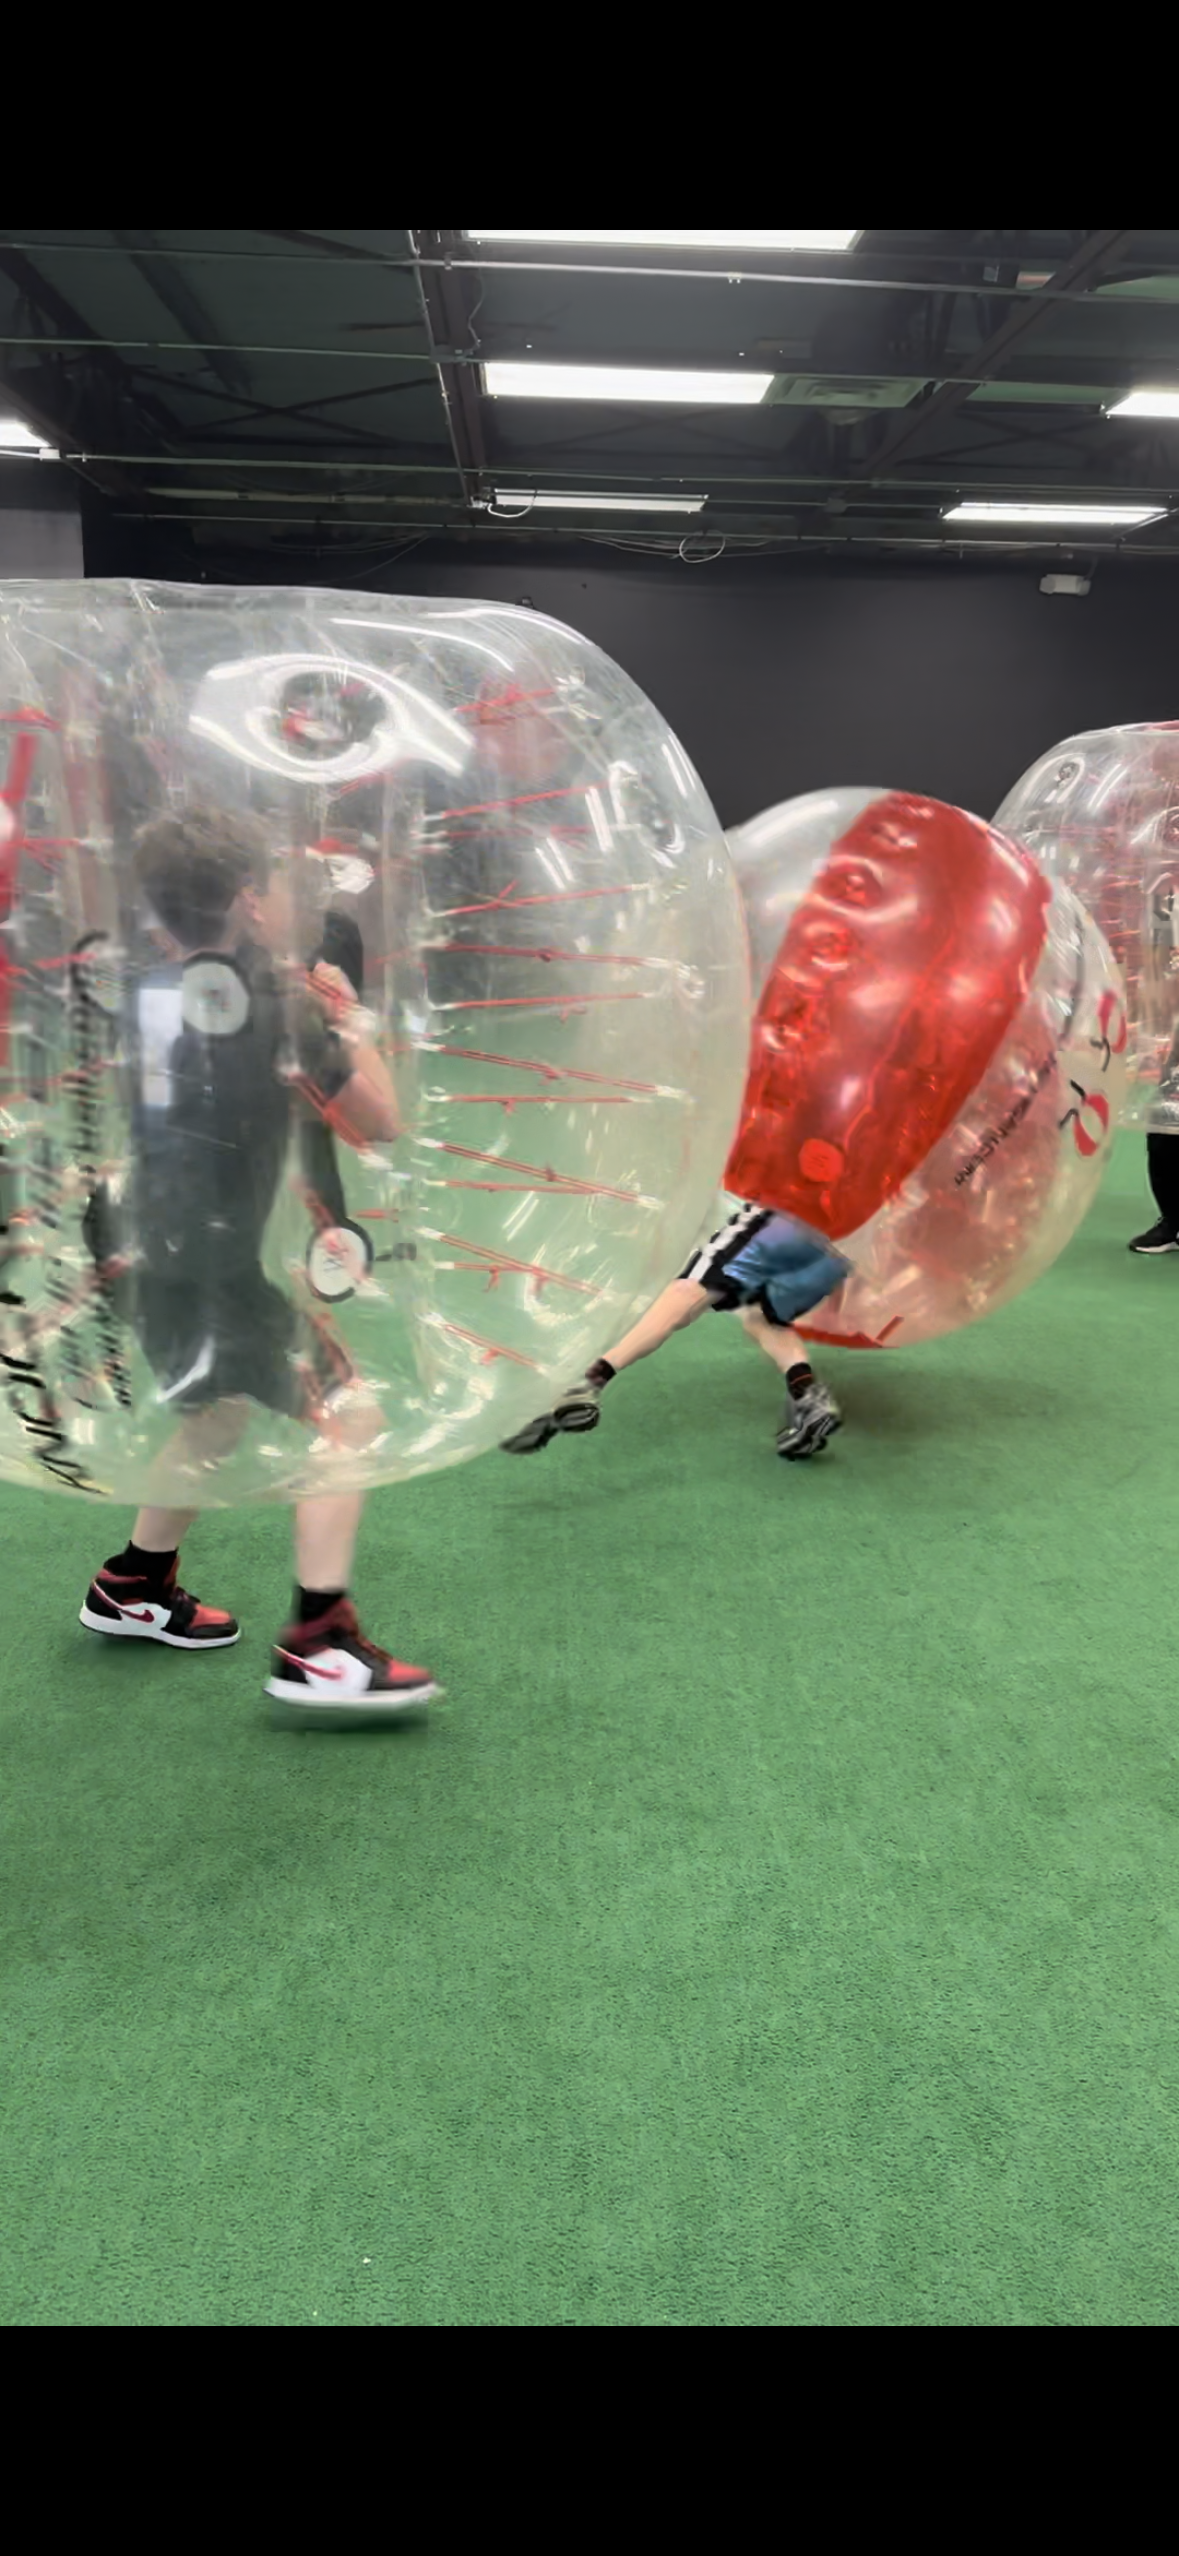 Up To 20 Knockerball Players 1.5 Hour Play Promo